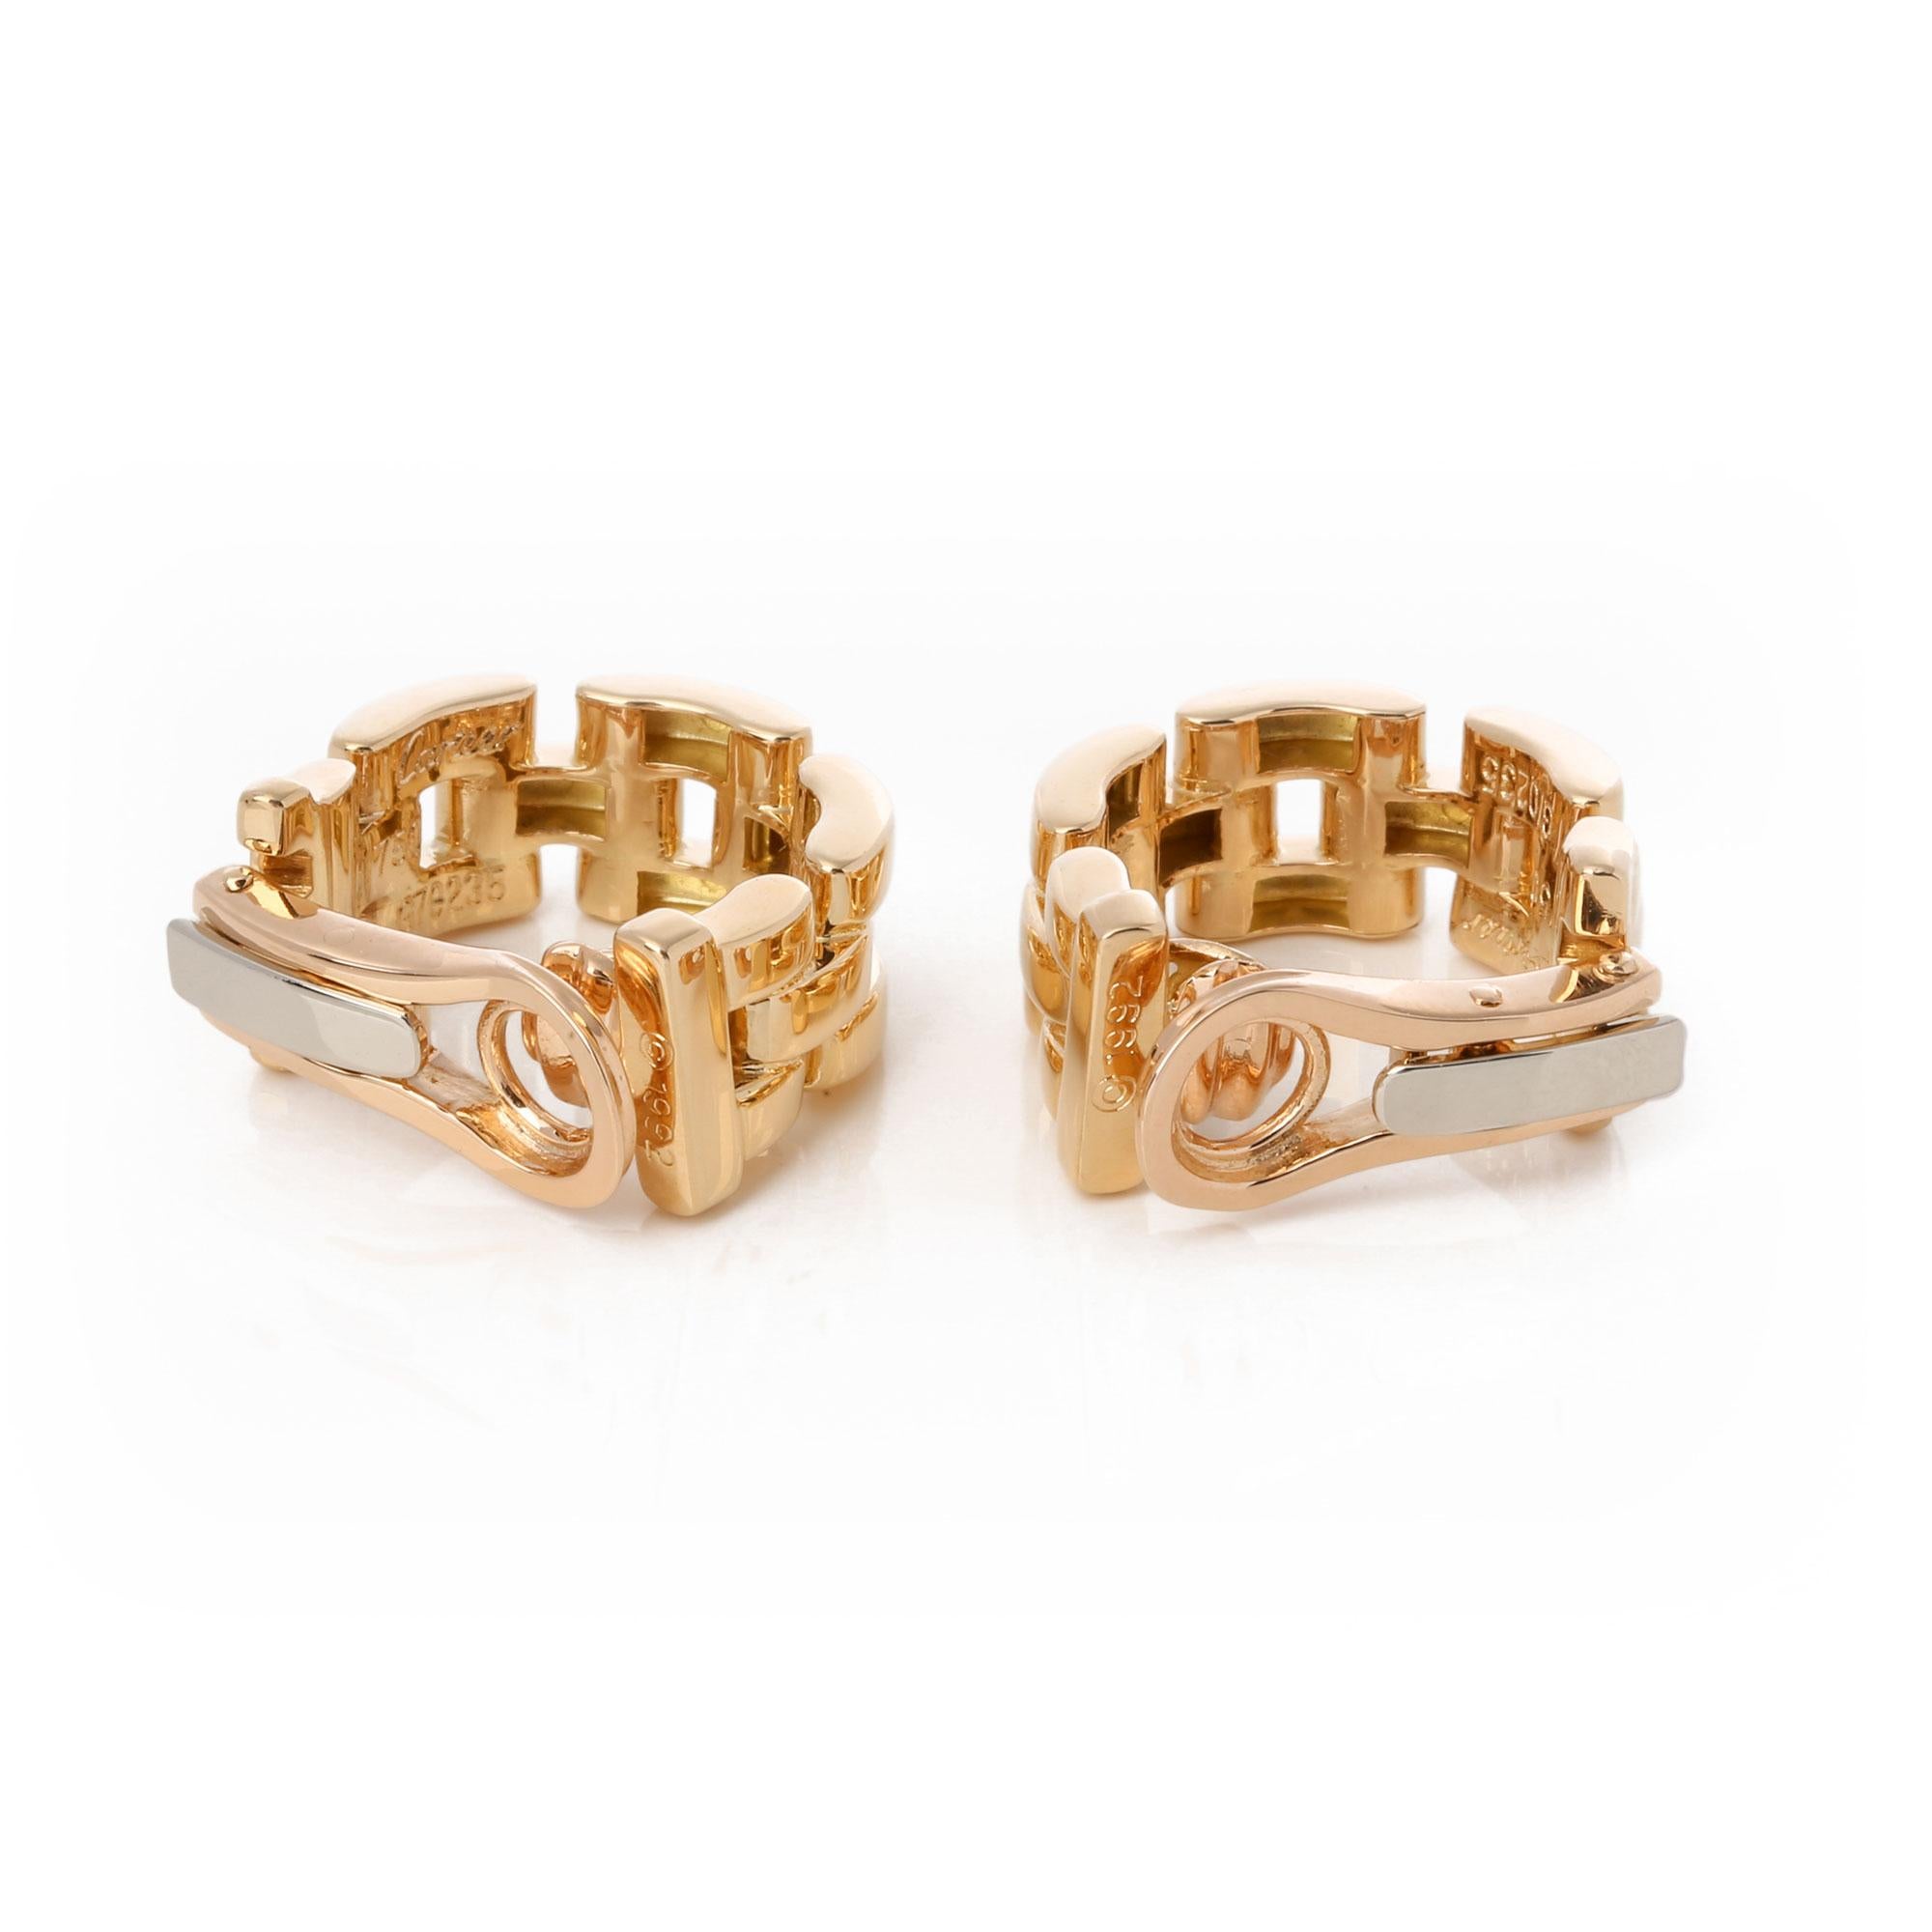 These earrings by Cartier are from their Maillon Panthere collection and features their signature link design made in 18k yellow gold. These earrings have a clip on back, they are suitable for both pierced and non-pierced ears. Accompanied with a